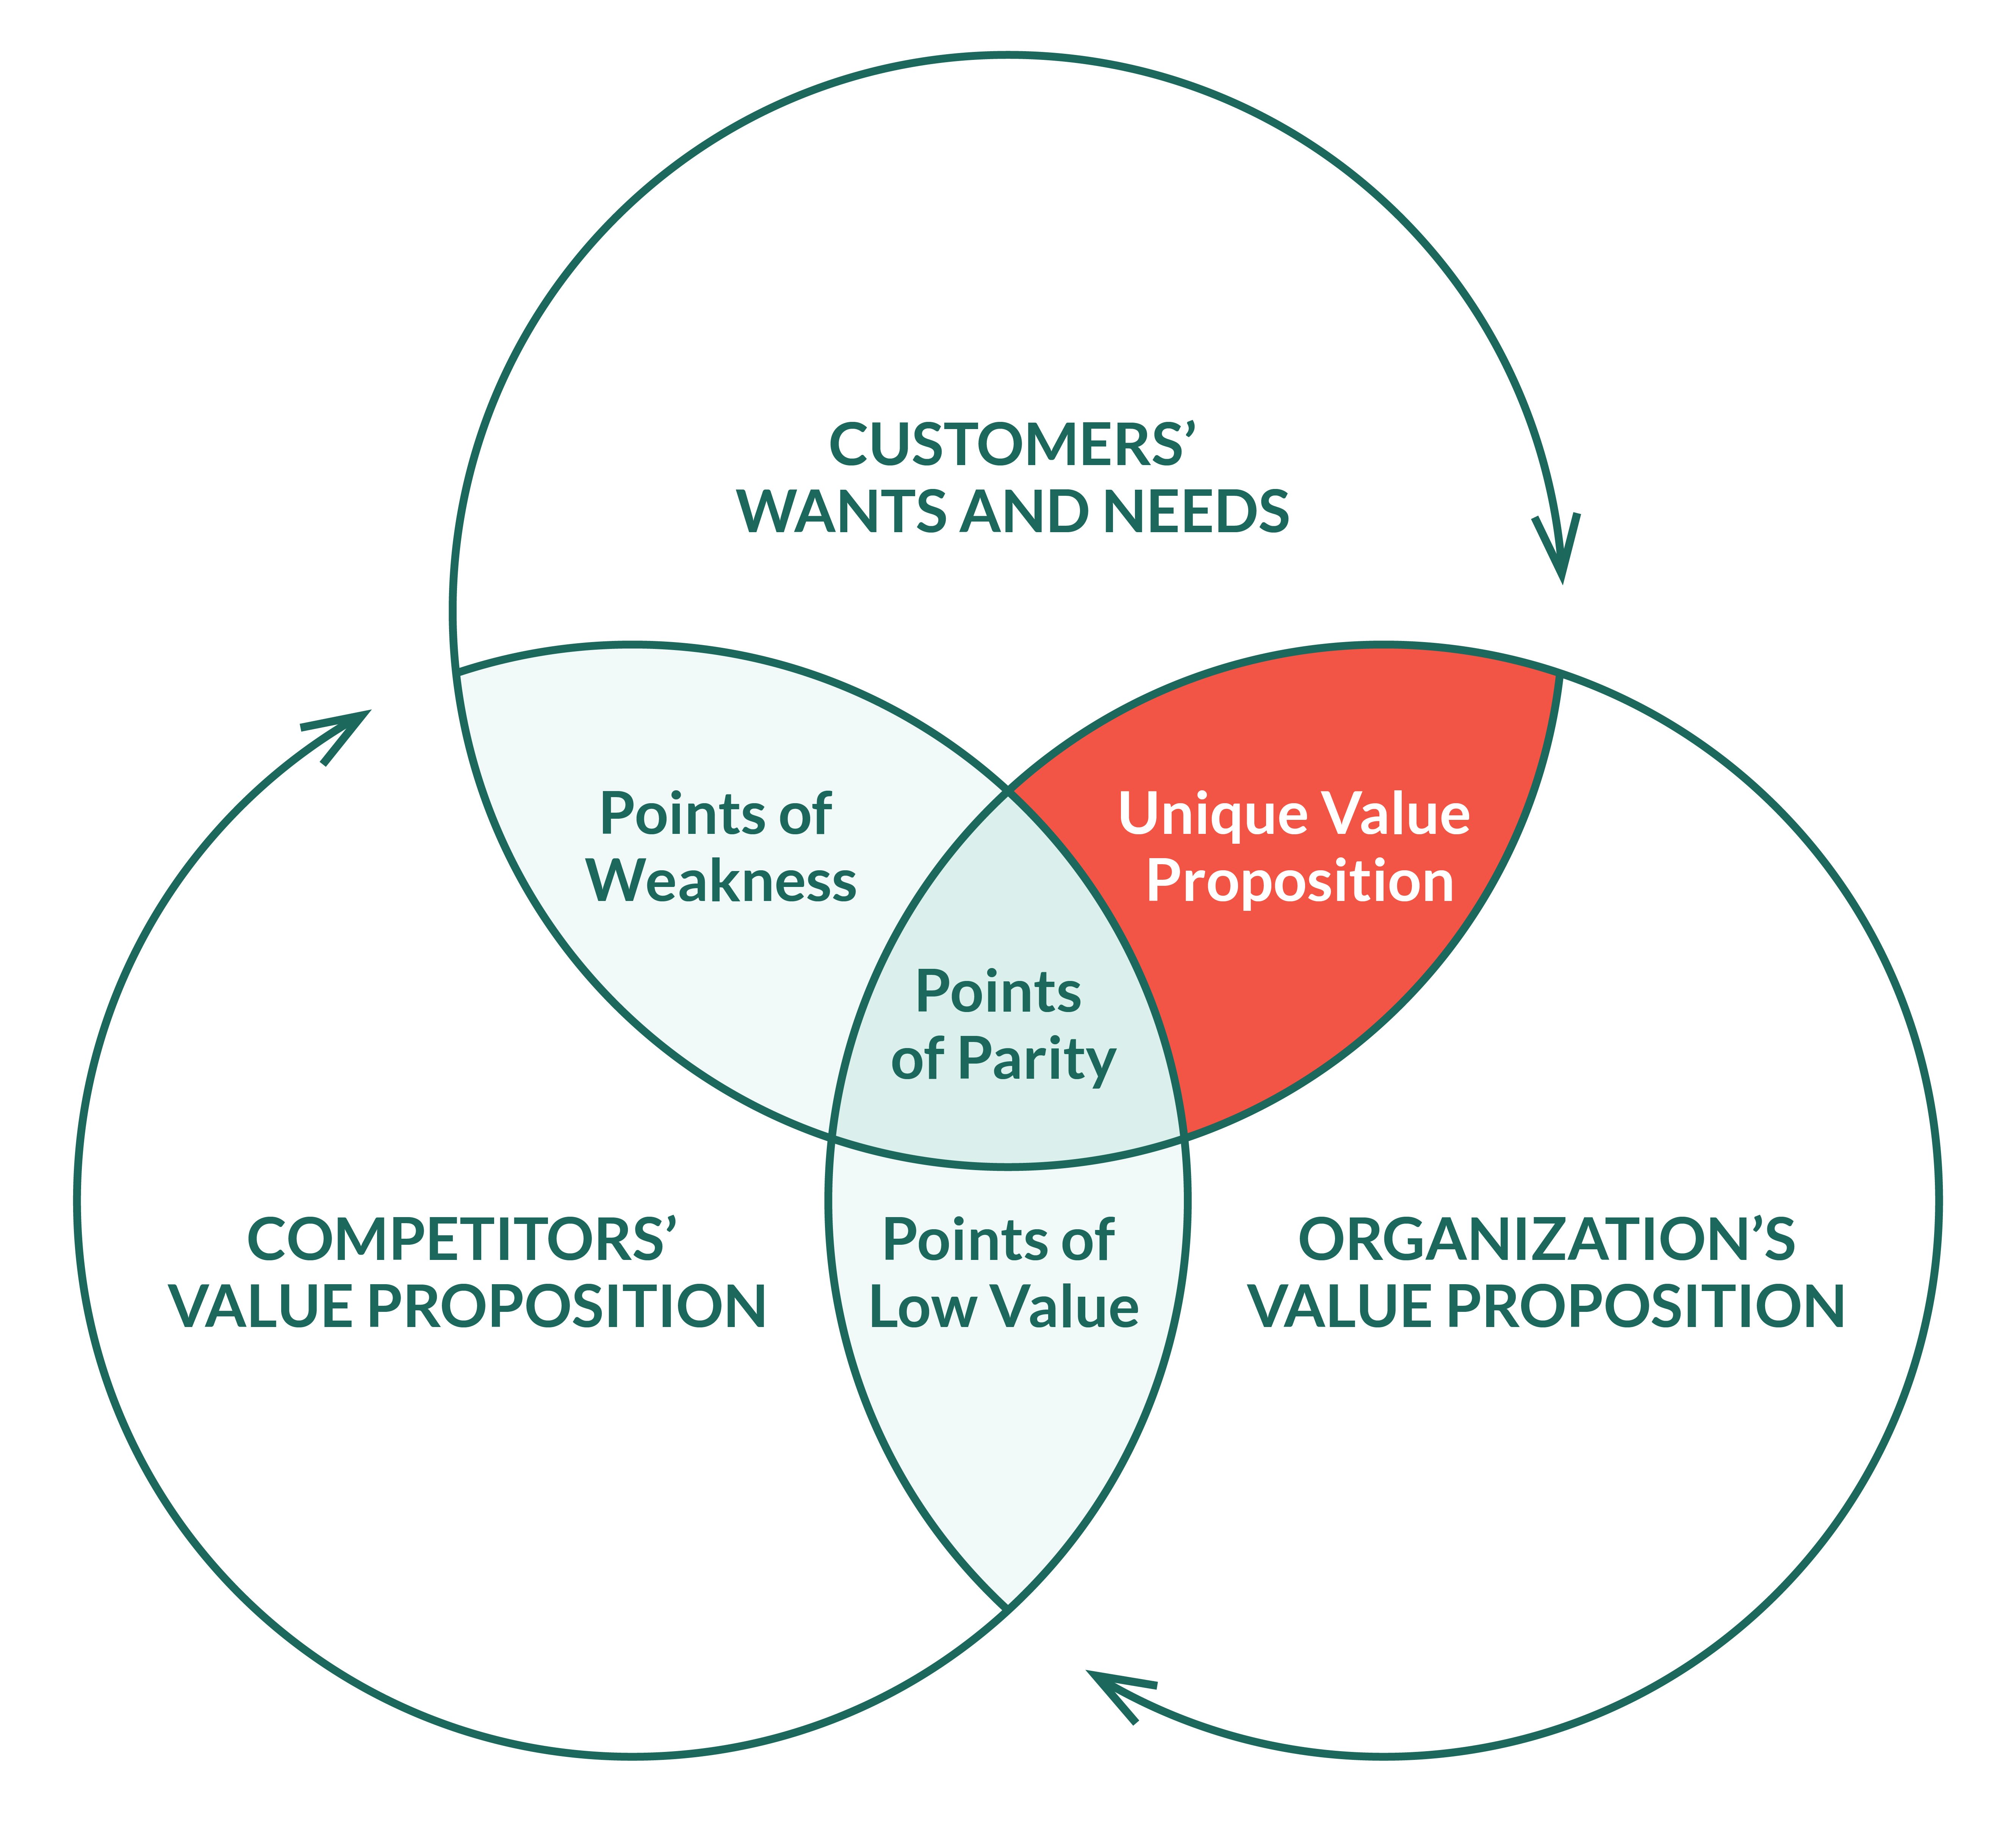 Venn diagram. 3 big circles: Customers' wants and needs, Organization's value proposition, Competitors' value proposition. Intersection points: points of weakness, points of low value, points of parity. Aim for the intersection of customers and organizatio n - that's where you'll find the unique value proposition.